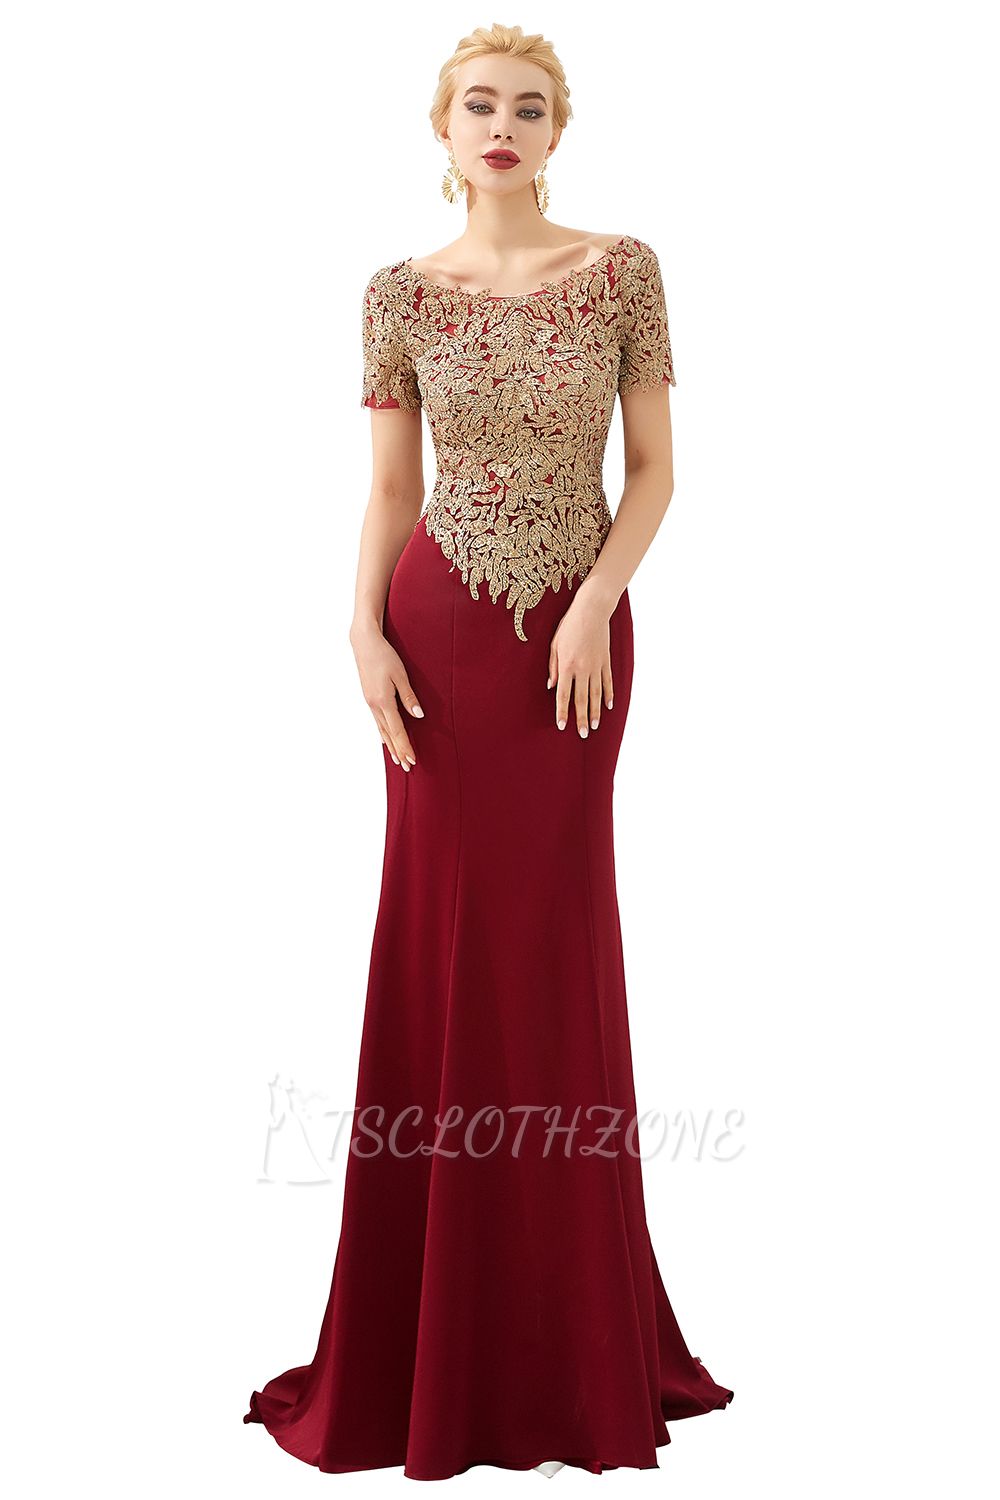 Hilary | Custom Made Short sleeves Burgundy Mermaid Prom Dress with Gold Lace Appliques